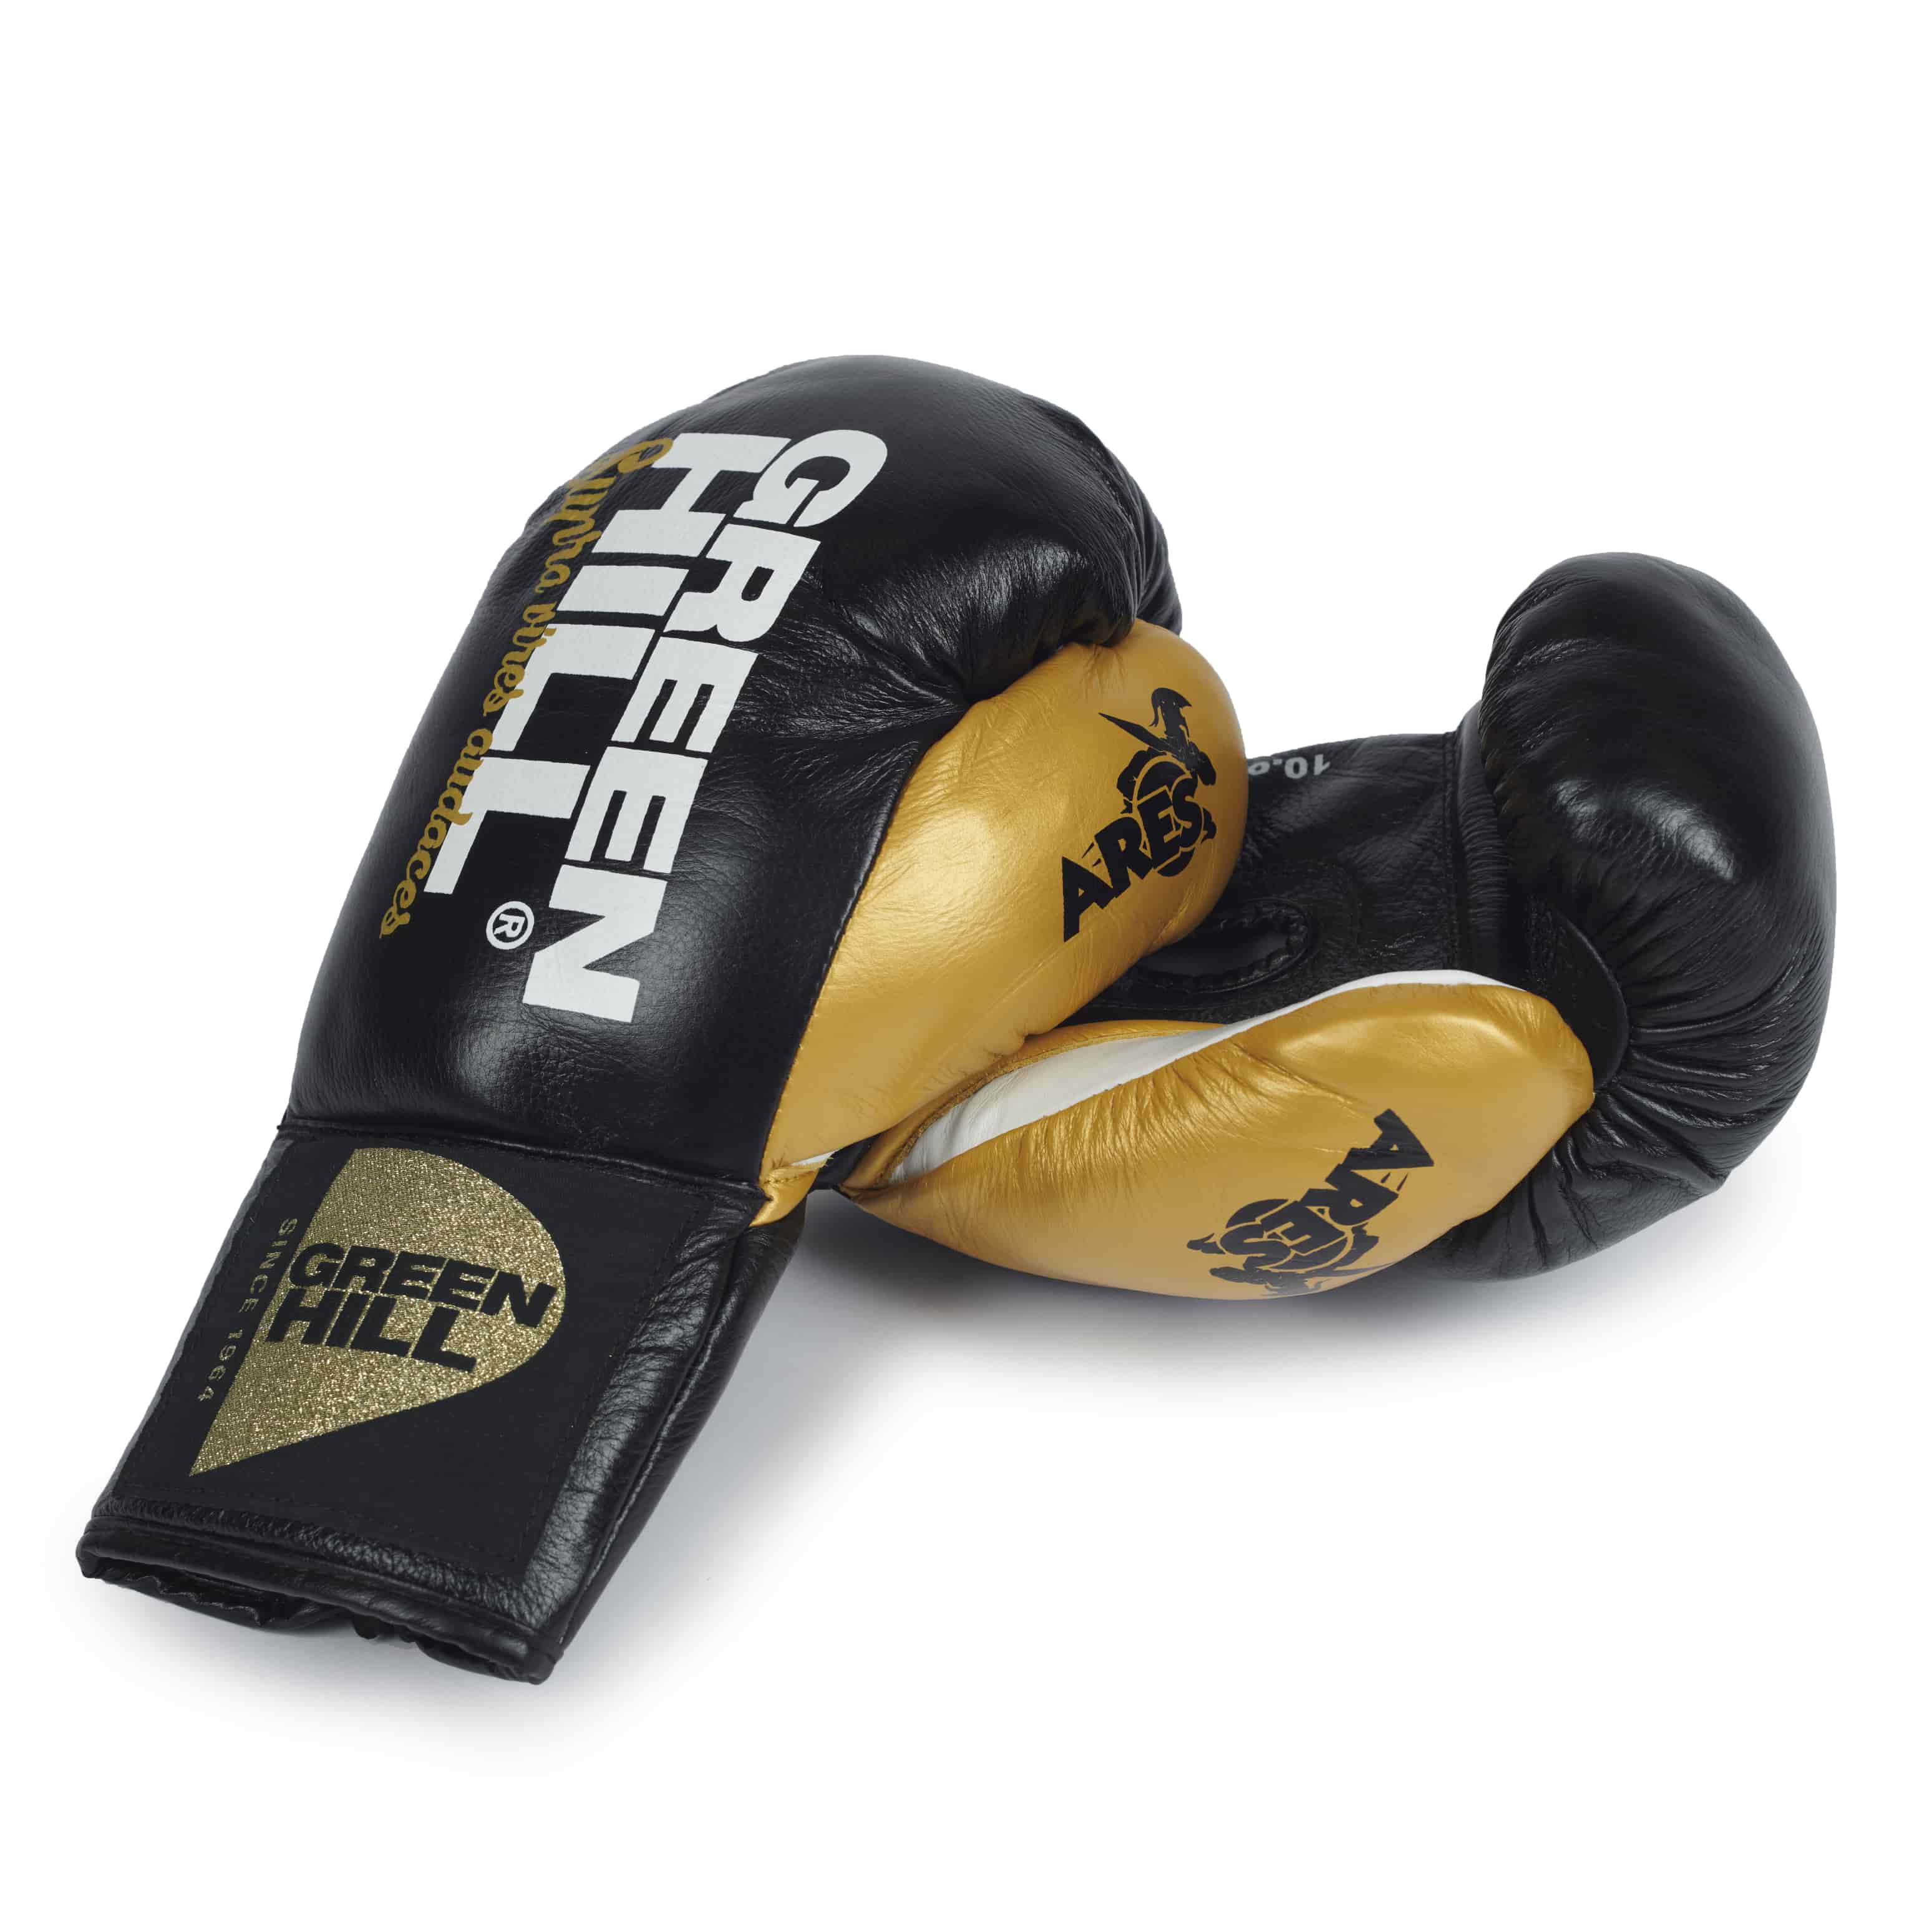 Boxing Gloves “Ares”